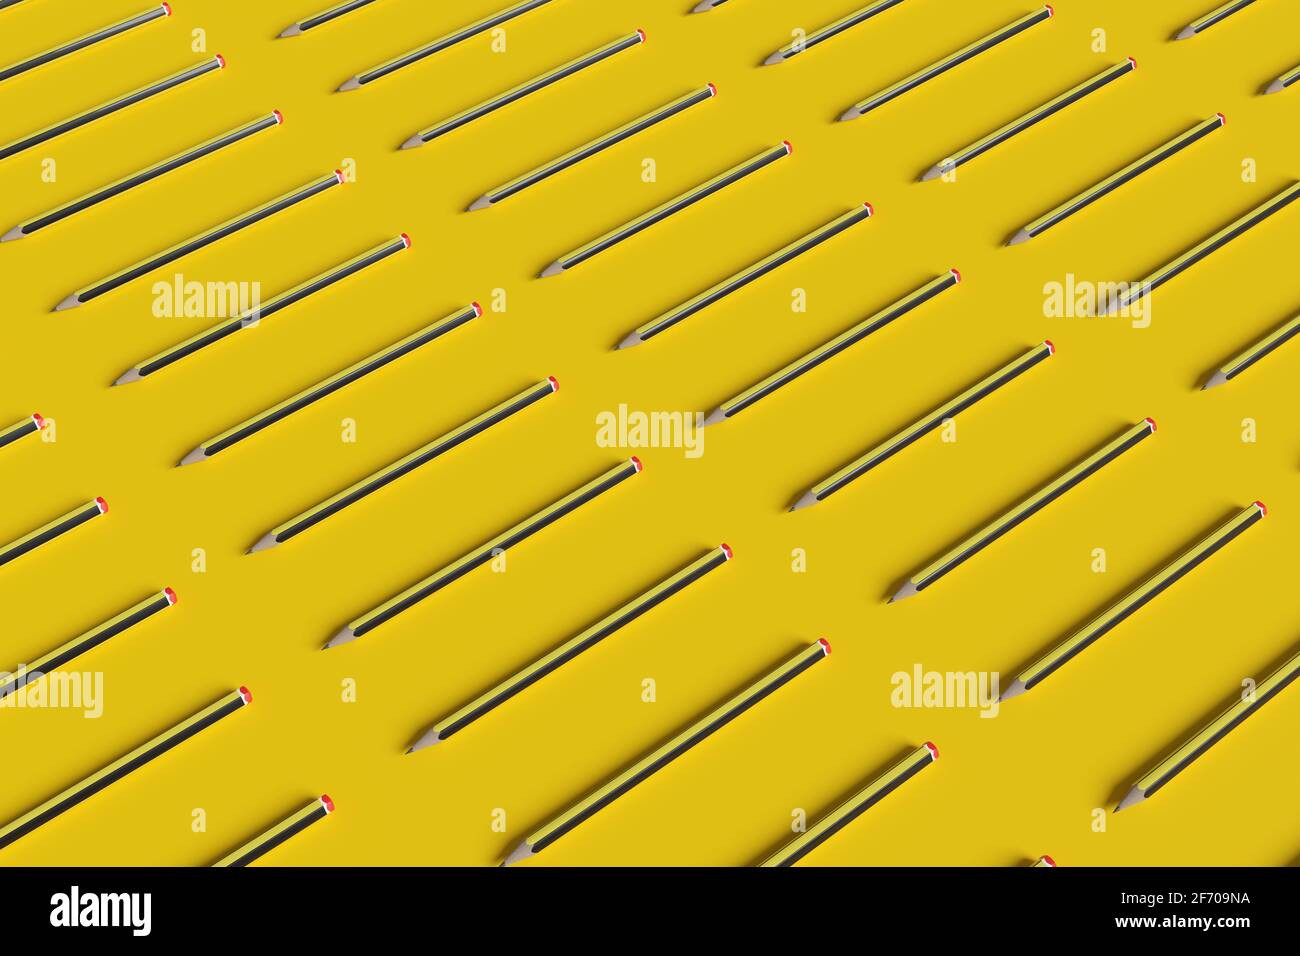 Set of graphite pencils on a yellow background. 3d illustration. Stock Photo